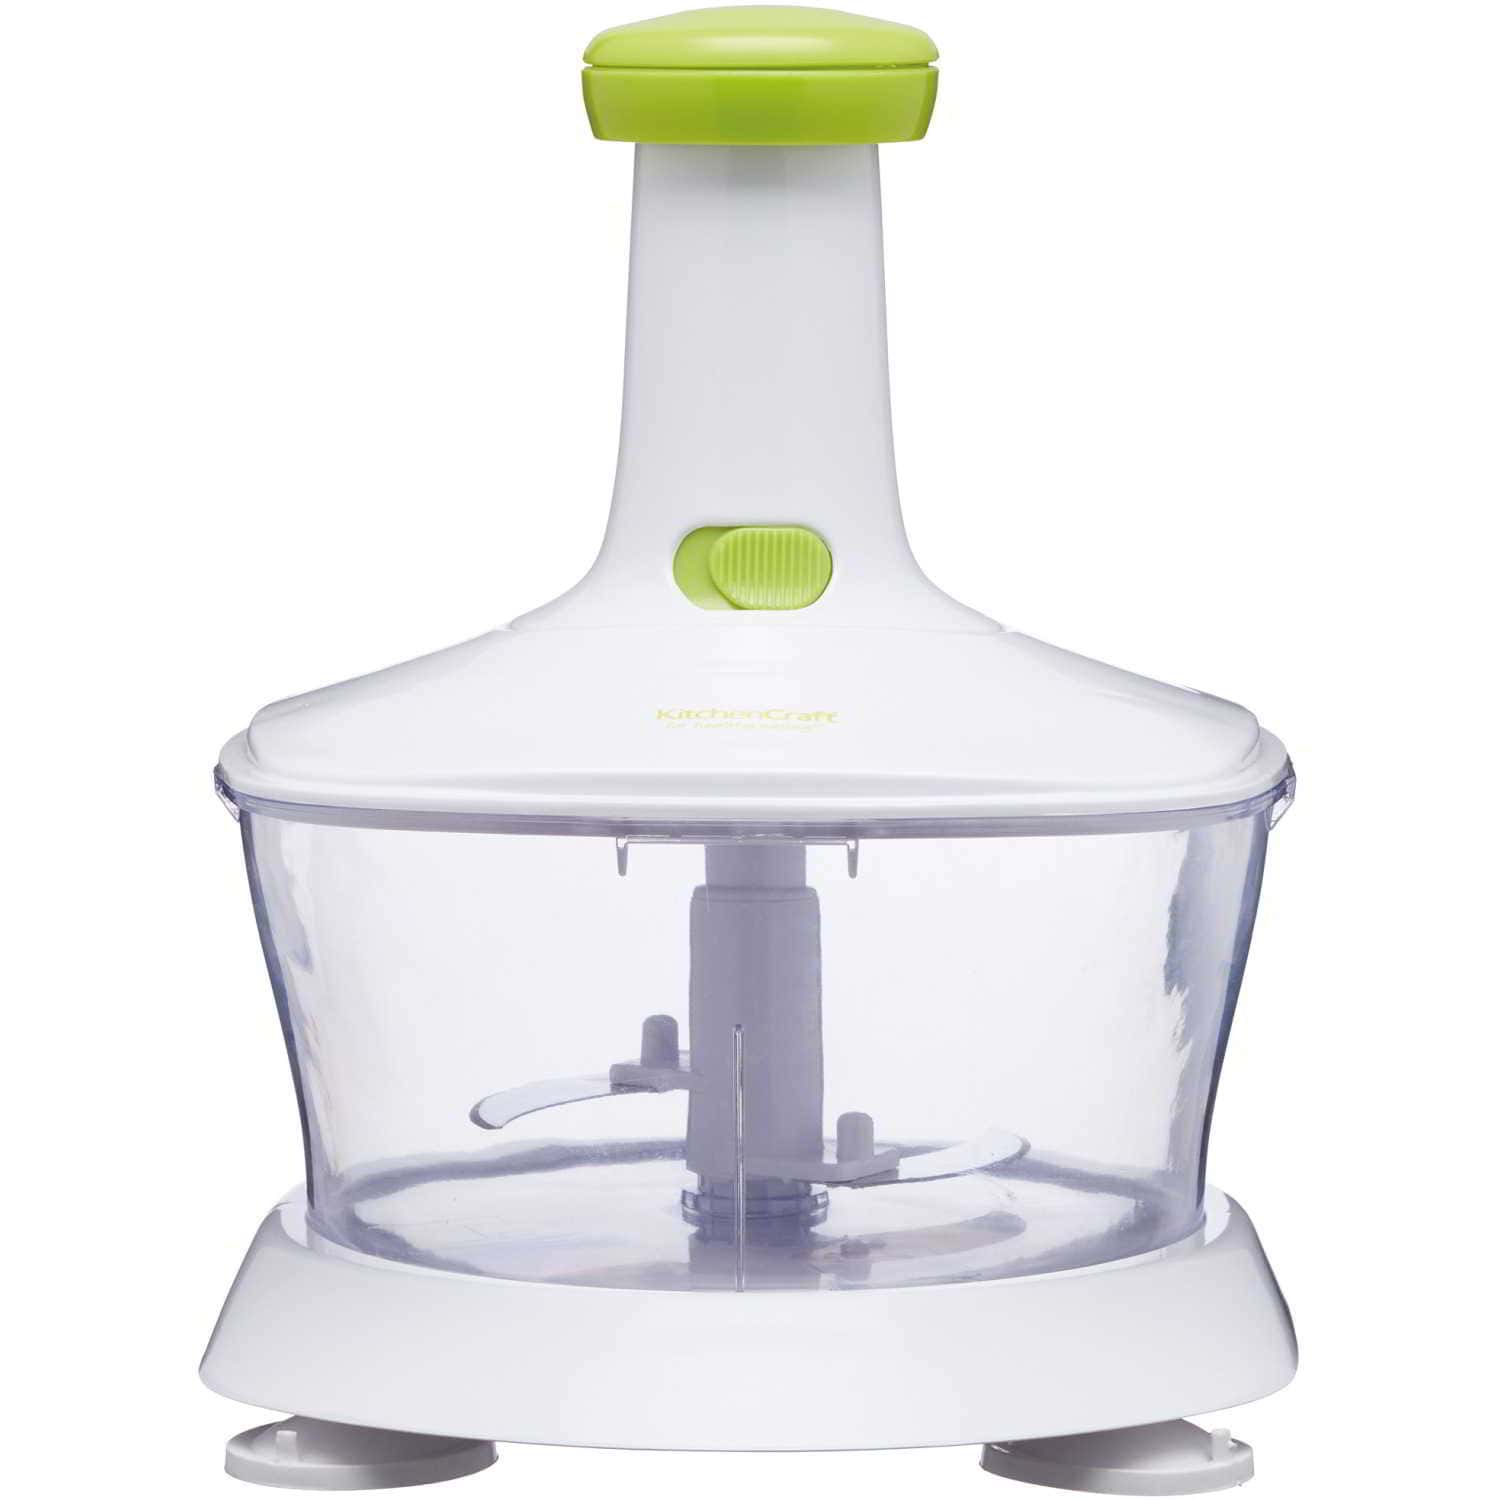 With this ricer and slicer from KitcheCrafts ‘Healthy Eating’ range it couldn’t be simpler,